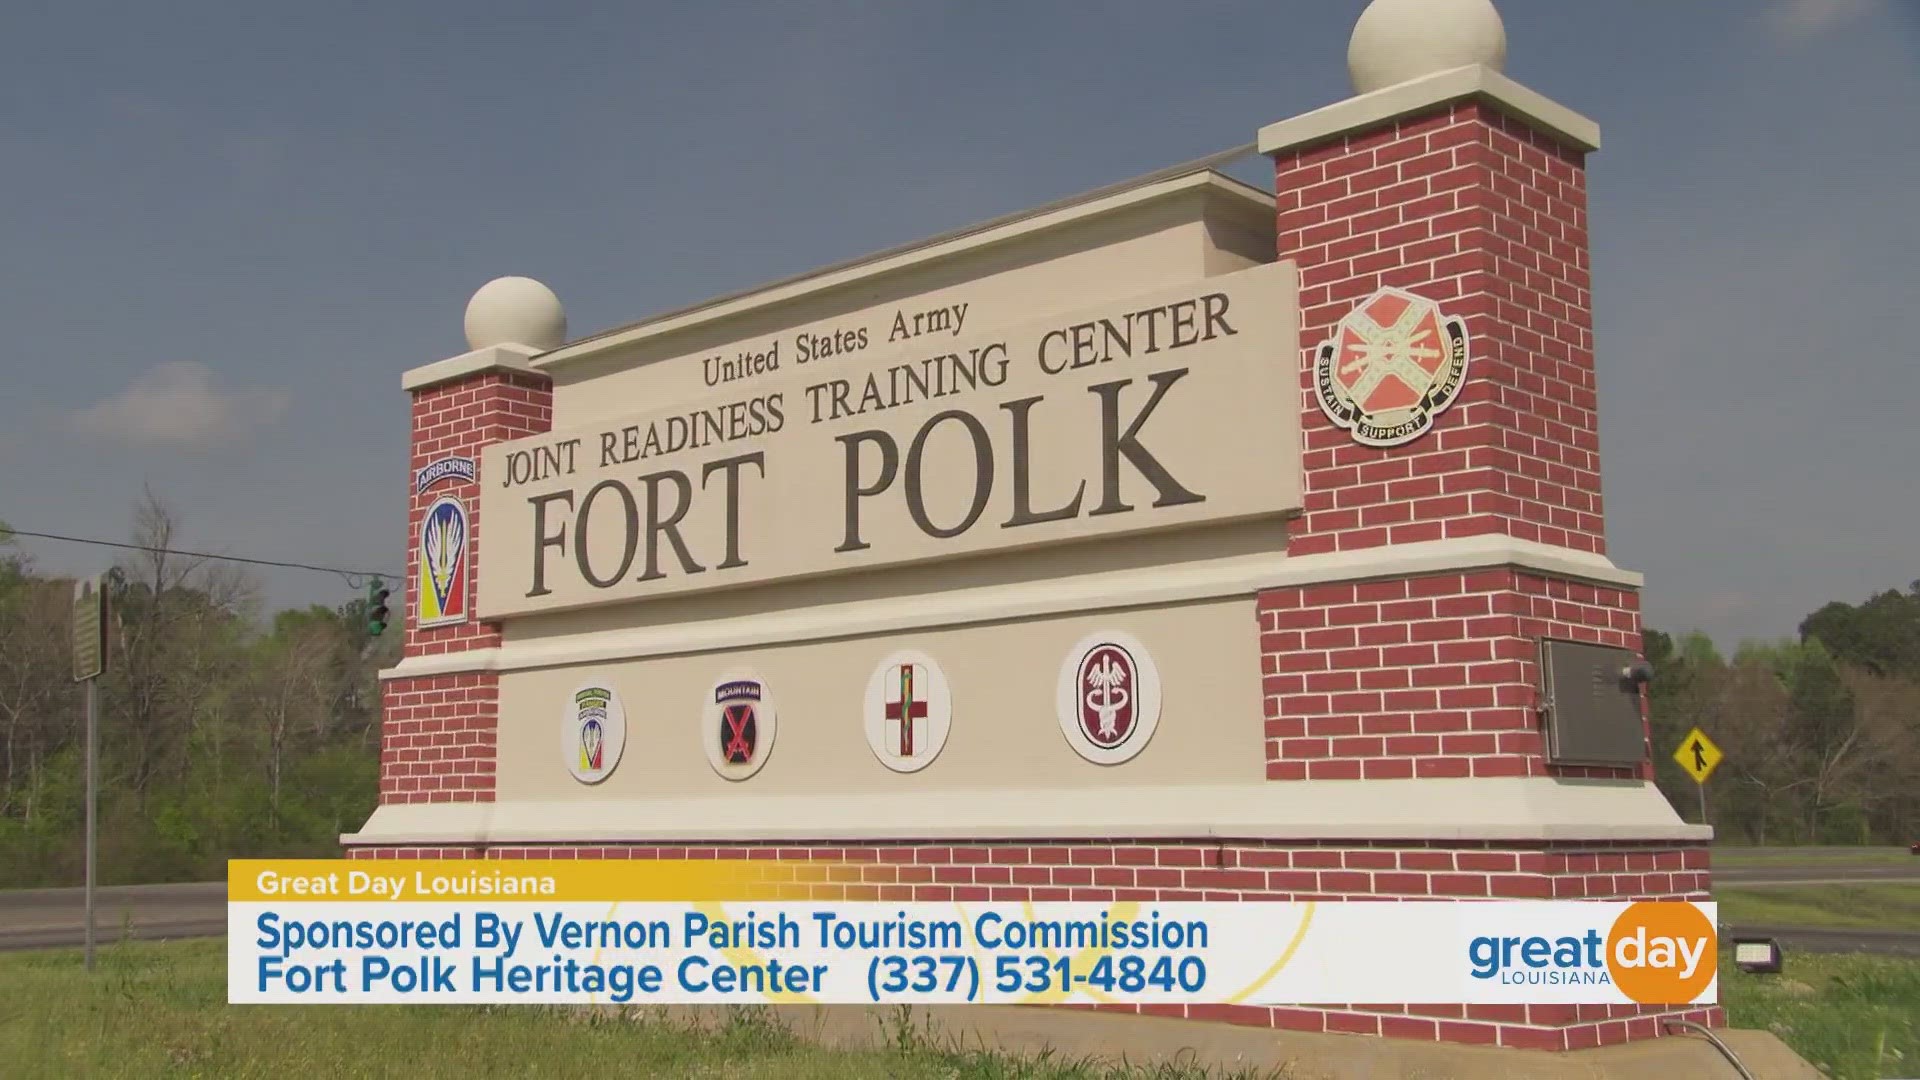 When you go on a One Tank Trip to Vernon Parish, you can learn more about the history at the Fort Polk Heritage Center.